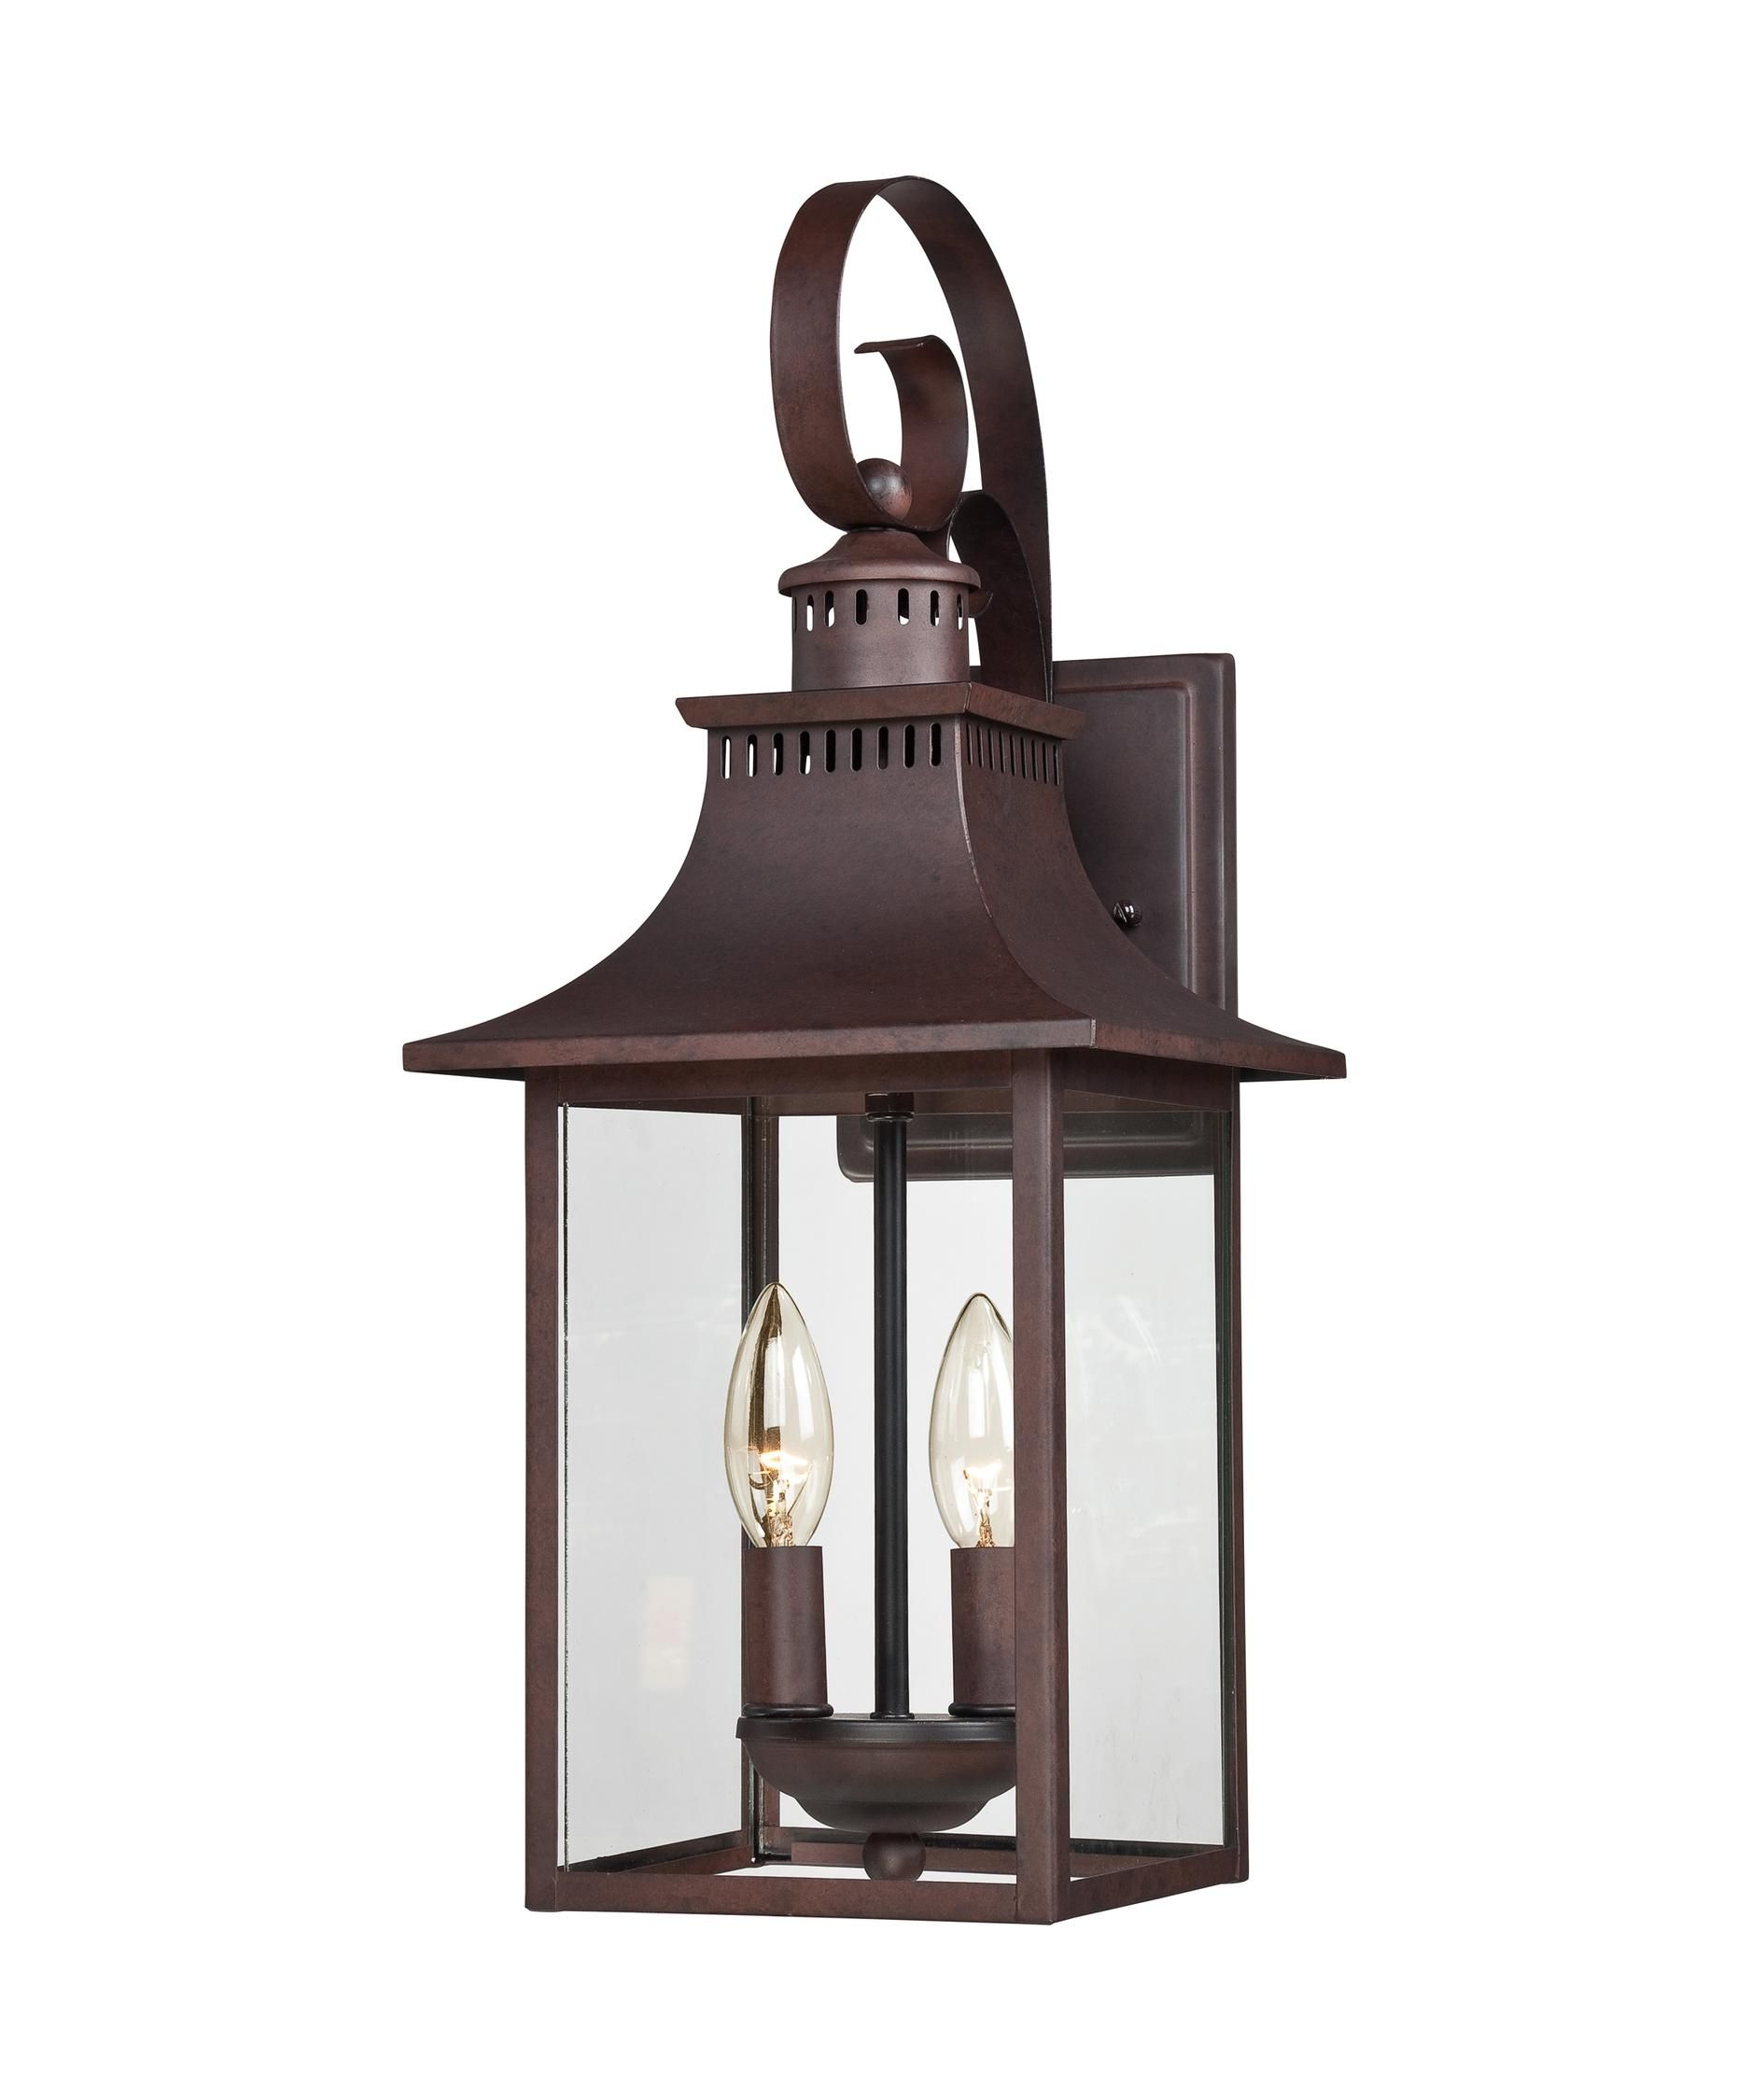 Quoizel Ccr8408 Chancellor 8 Inch Wide 2 Light Outdoor Wall Light Pertaining To Quoizel Outdoor Wall Lighting (Photo 3 of 15)